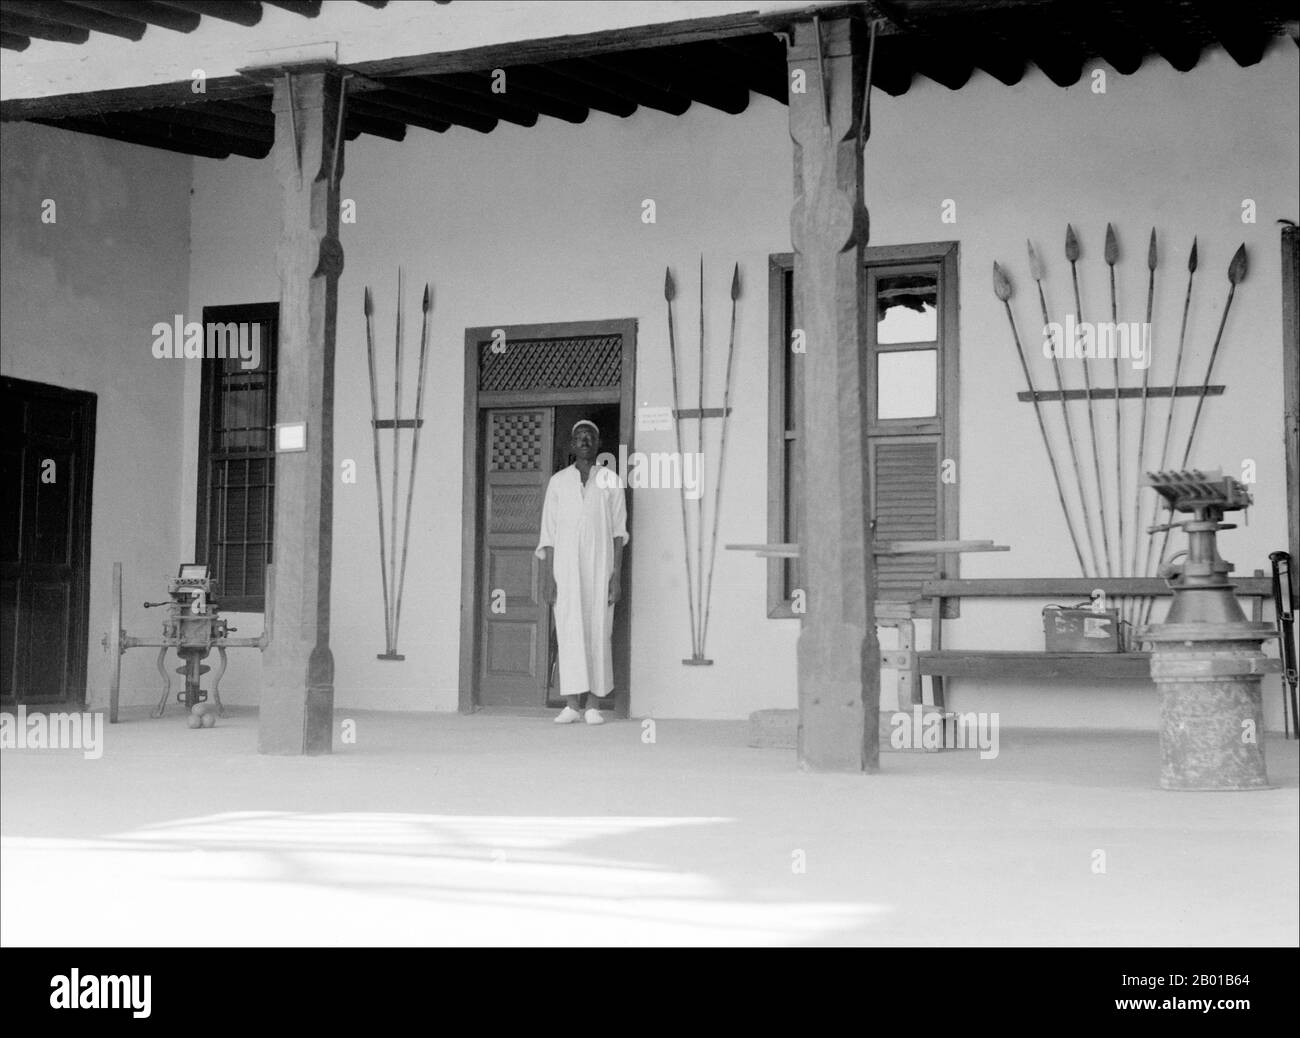 Sudan: A door keeper at the house of the former Mahdi, Omdurman, 1936.  Muhammad Ahmad bin Abd Allah (12 August 1844 - 22 June 1885) was a religious leader of the Samaniyya order in Sudan who, on June 29, 1881, proclaimed himself as the Mahdi or messianic redeemer of the Islamic faith. His proclamation came during a period of widespread resentment among the Sudanese population of the oppressive policies of the Turco-Egyptian rulers, and capitalised on the messianic beliefs popular among the various Sudanese religious sects of the time. Stock Photo